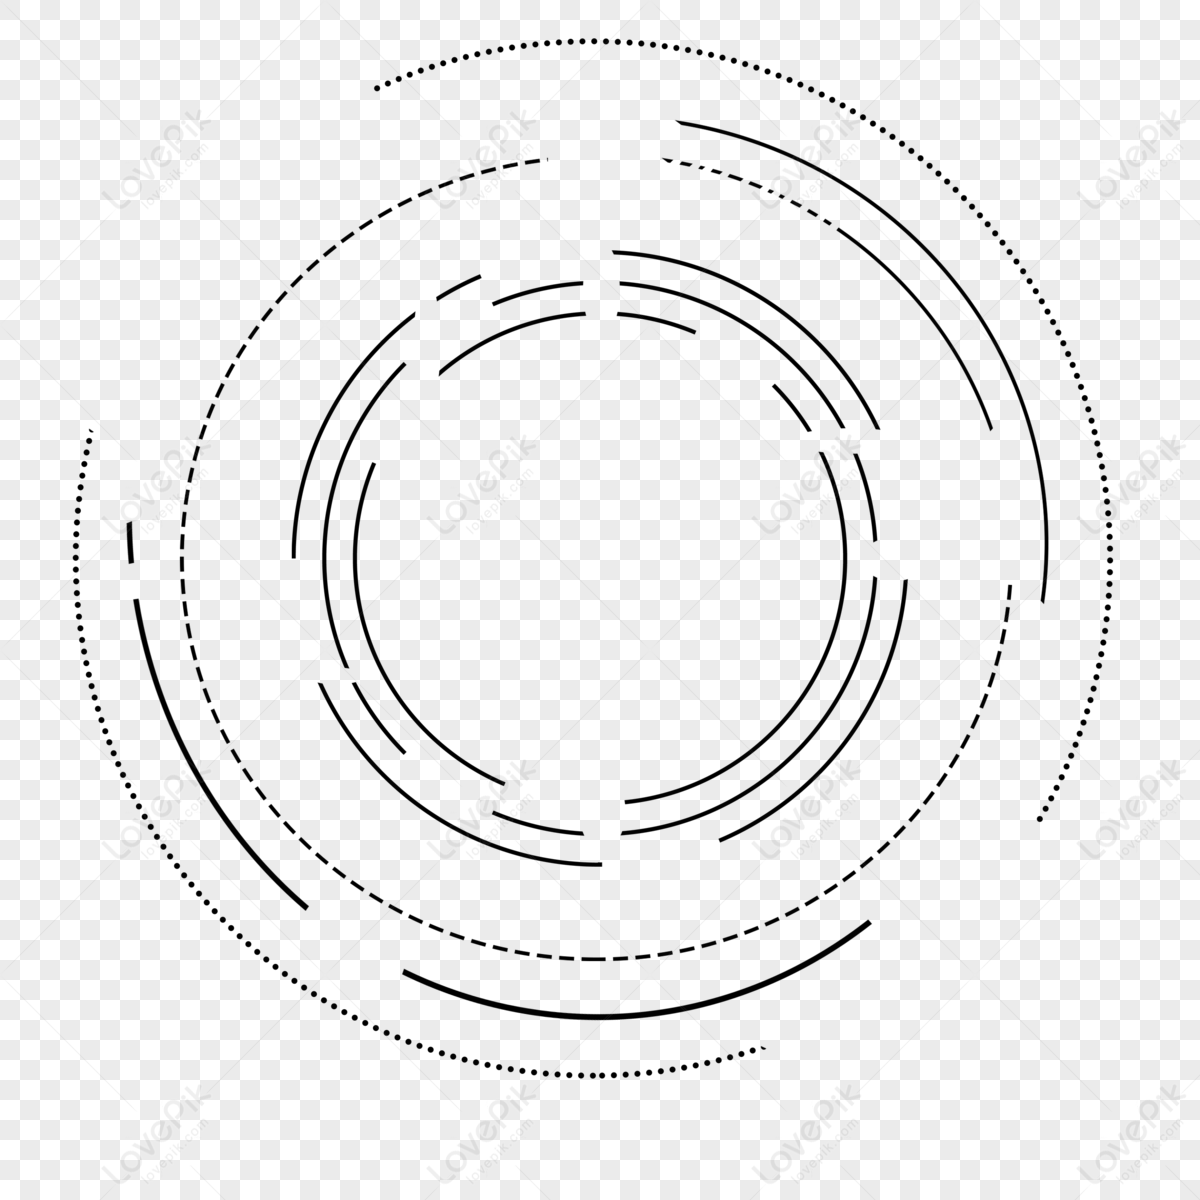 Grunge Black Chalk Hand Drawing in Circle or Round Shape Textured on White  Background Stock Illustration - Illustration of business, handdrawing:  183914120